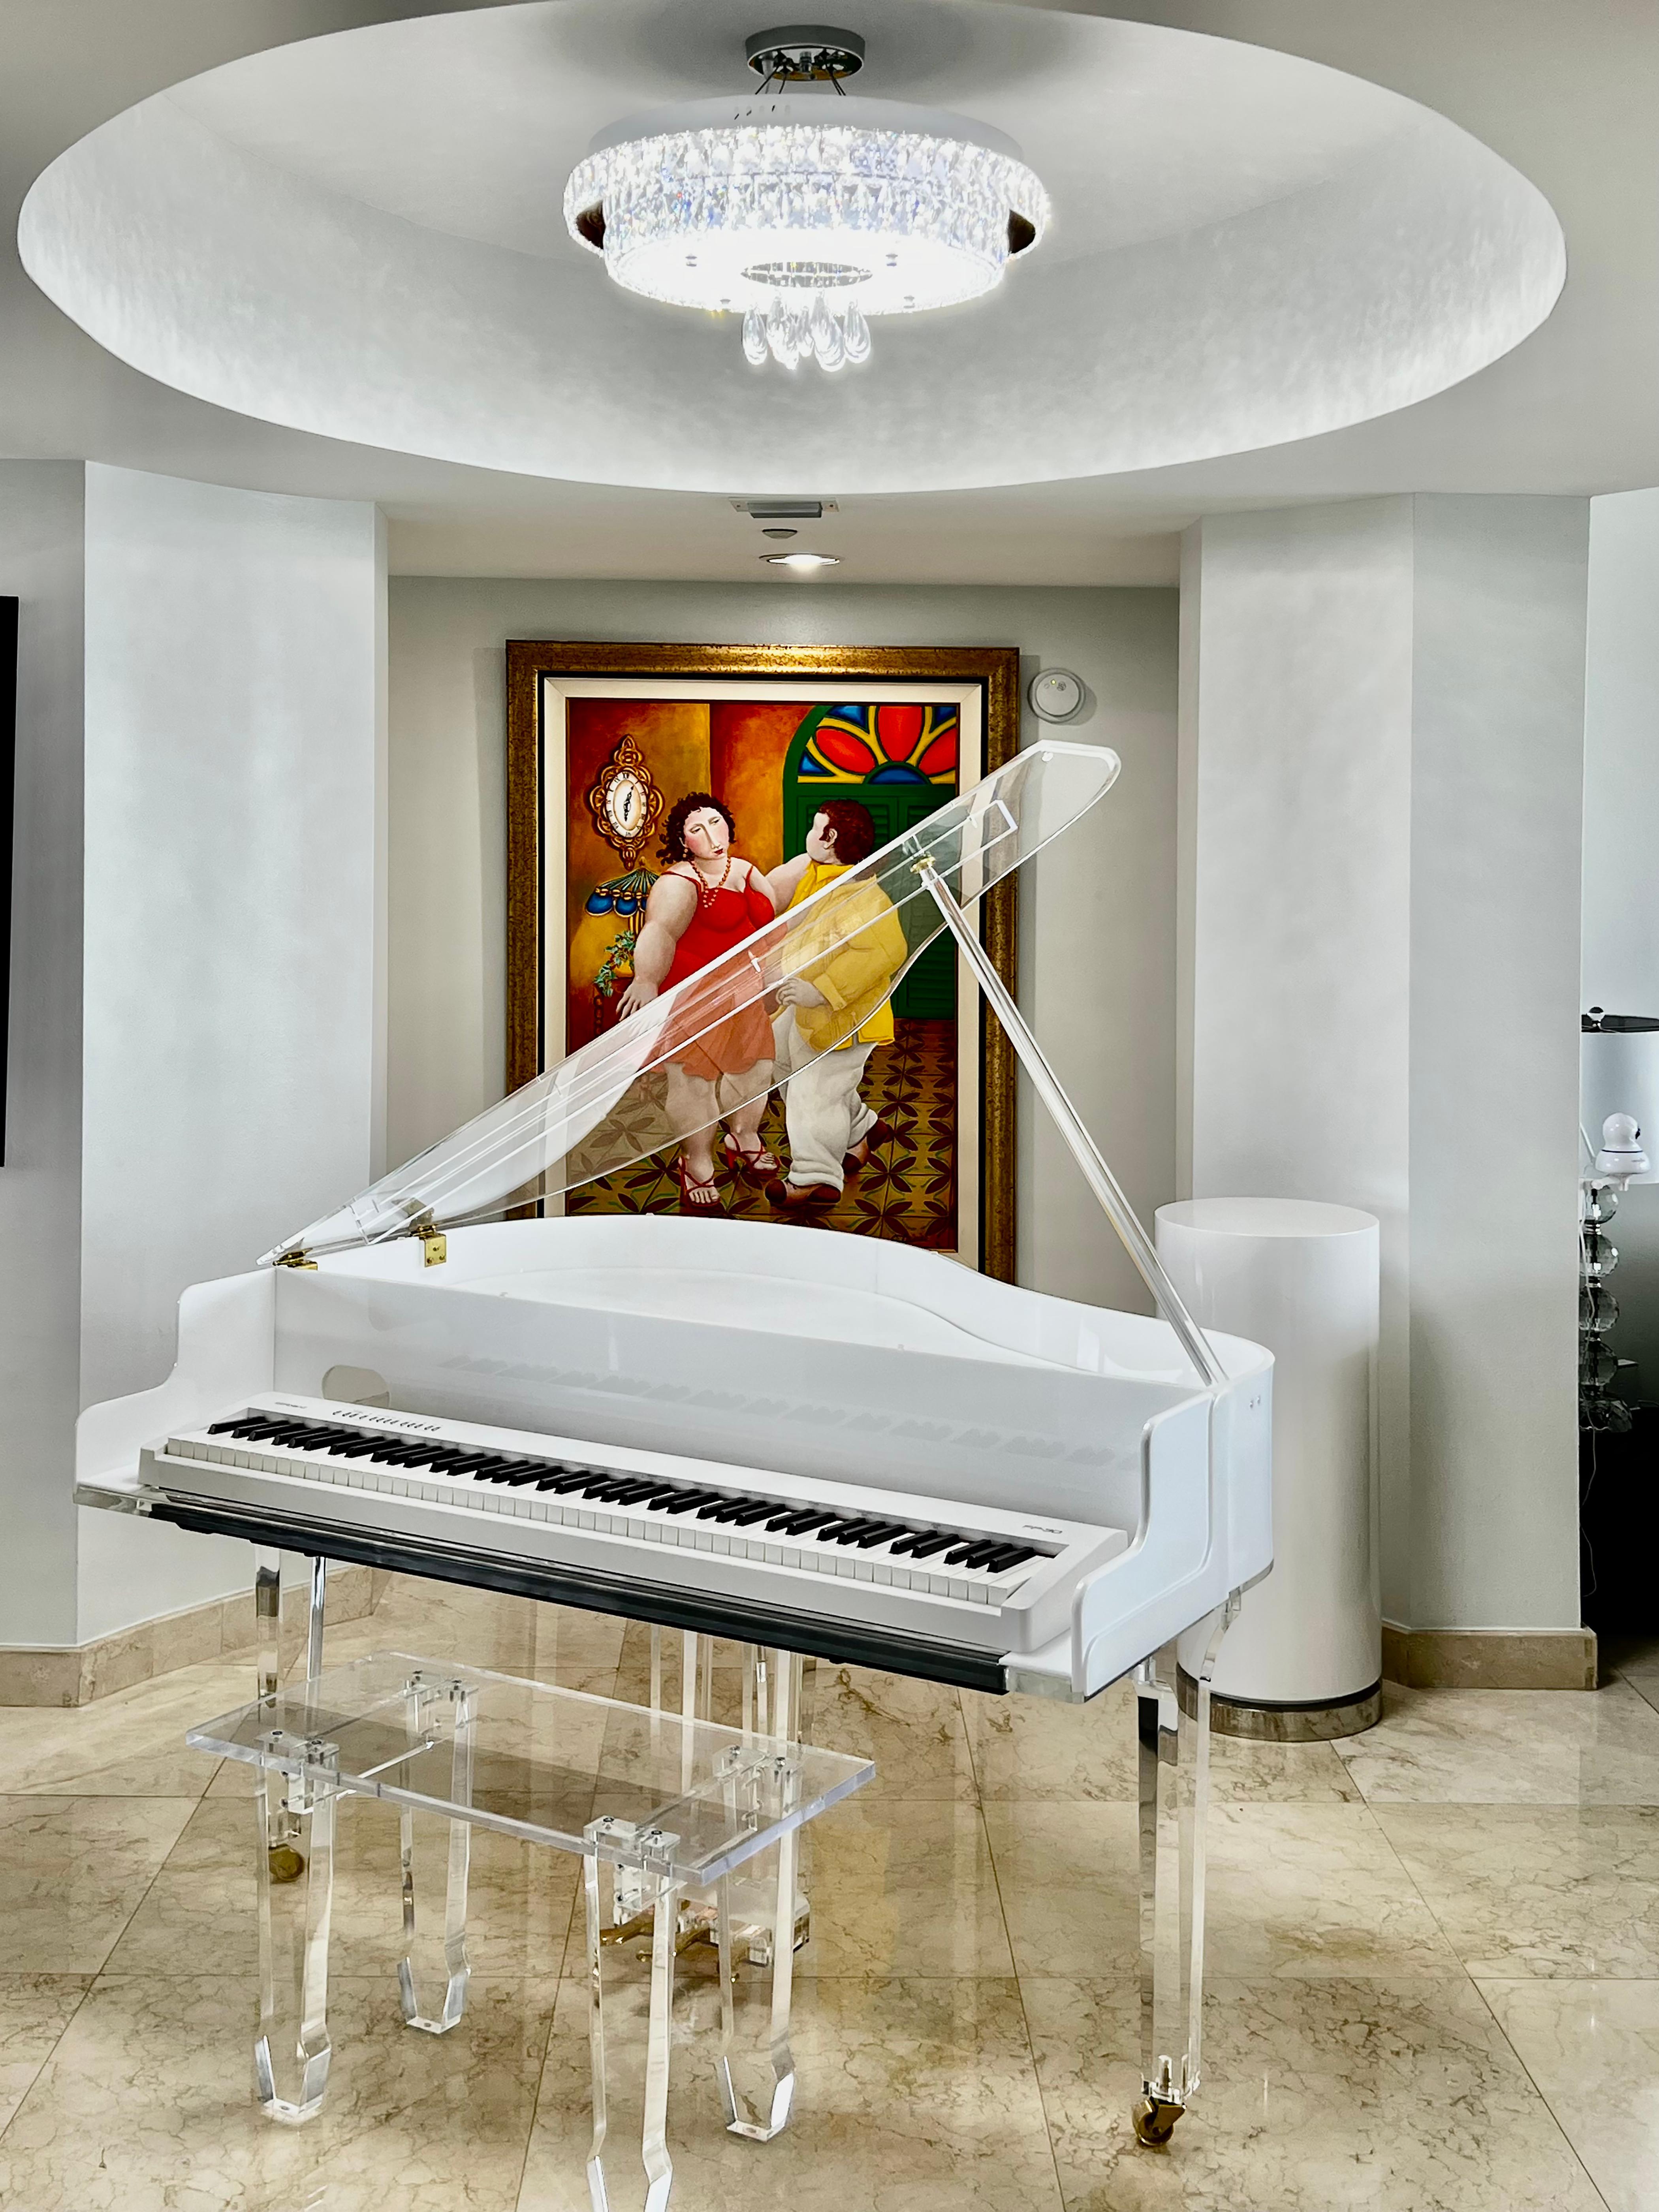 Custom-made Lucite Acrylic Baby Grand Piano and Bench by Iconic Design Gallery

Offered for sale is a new custom-made baby grand piano in Lucite and acrylic with a matching bench. The piano is crafted with thick Lucite legs on casters and a hinged